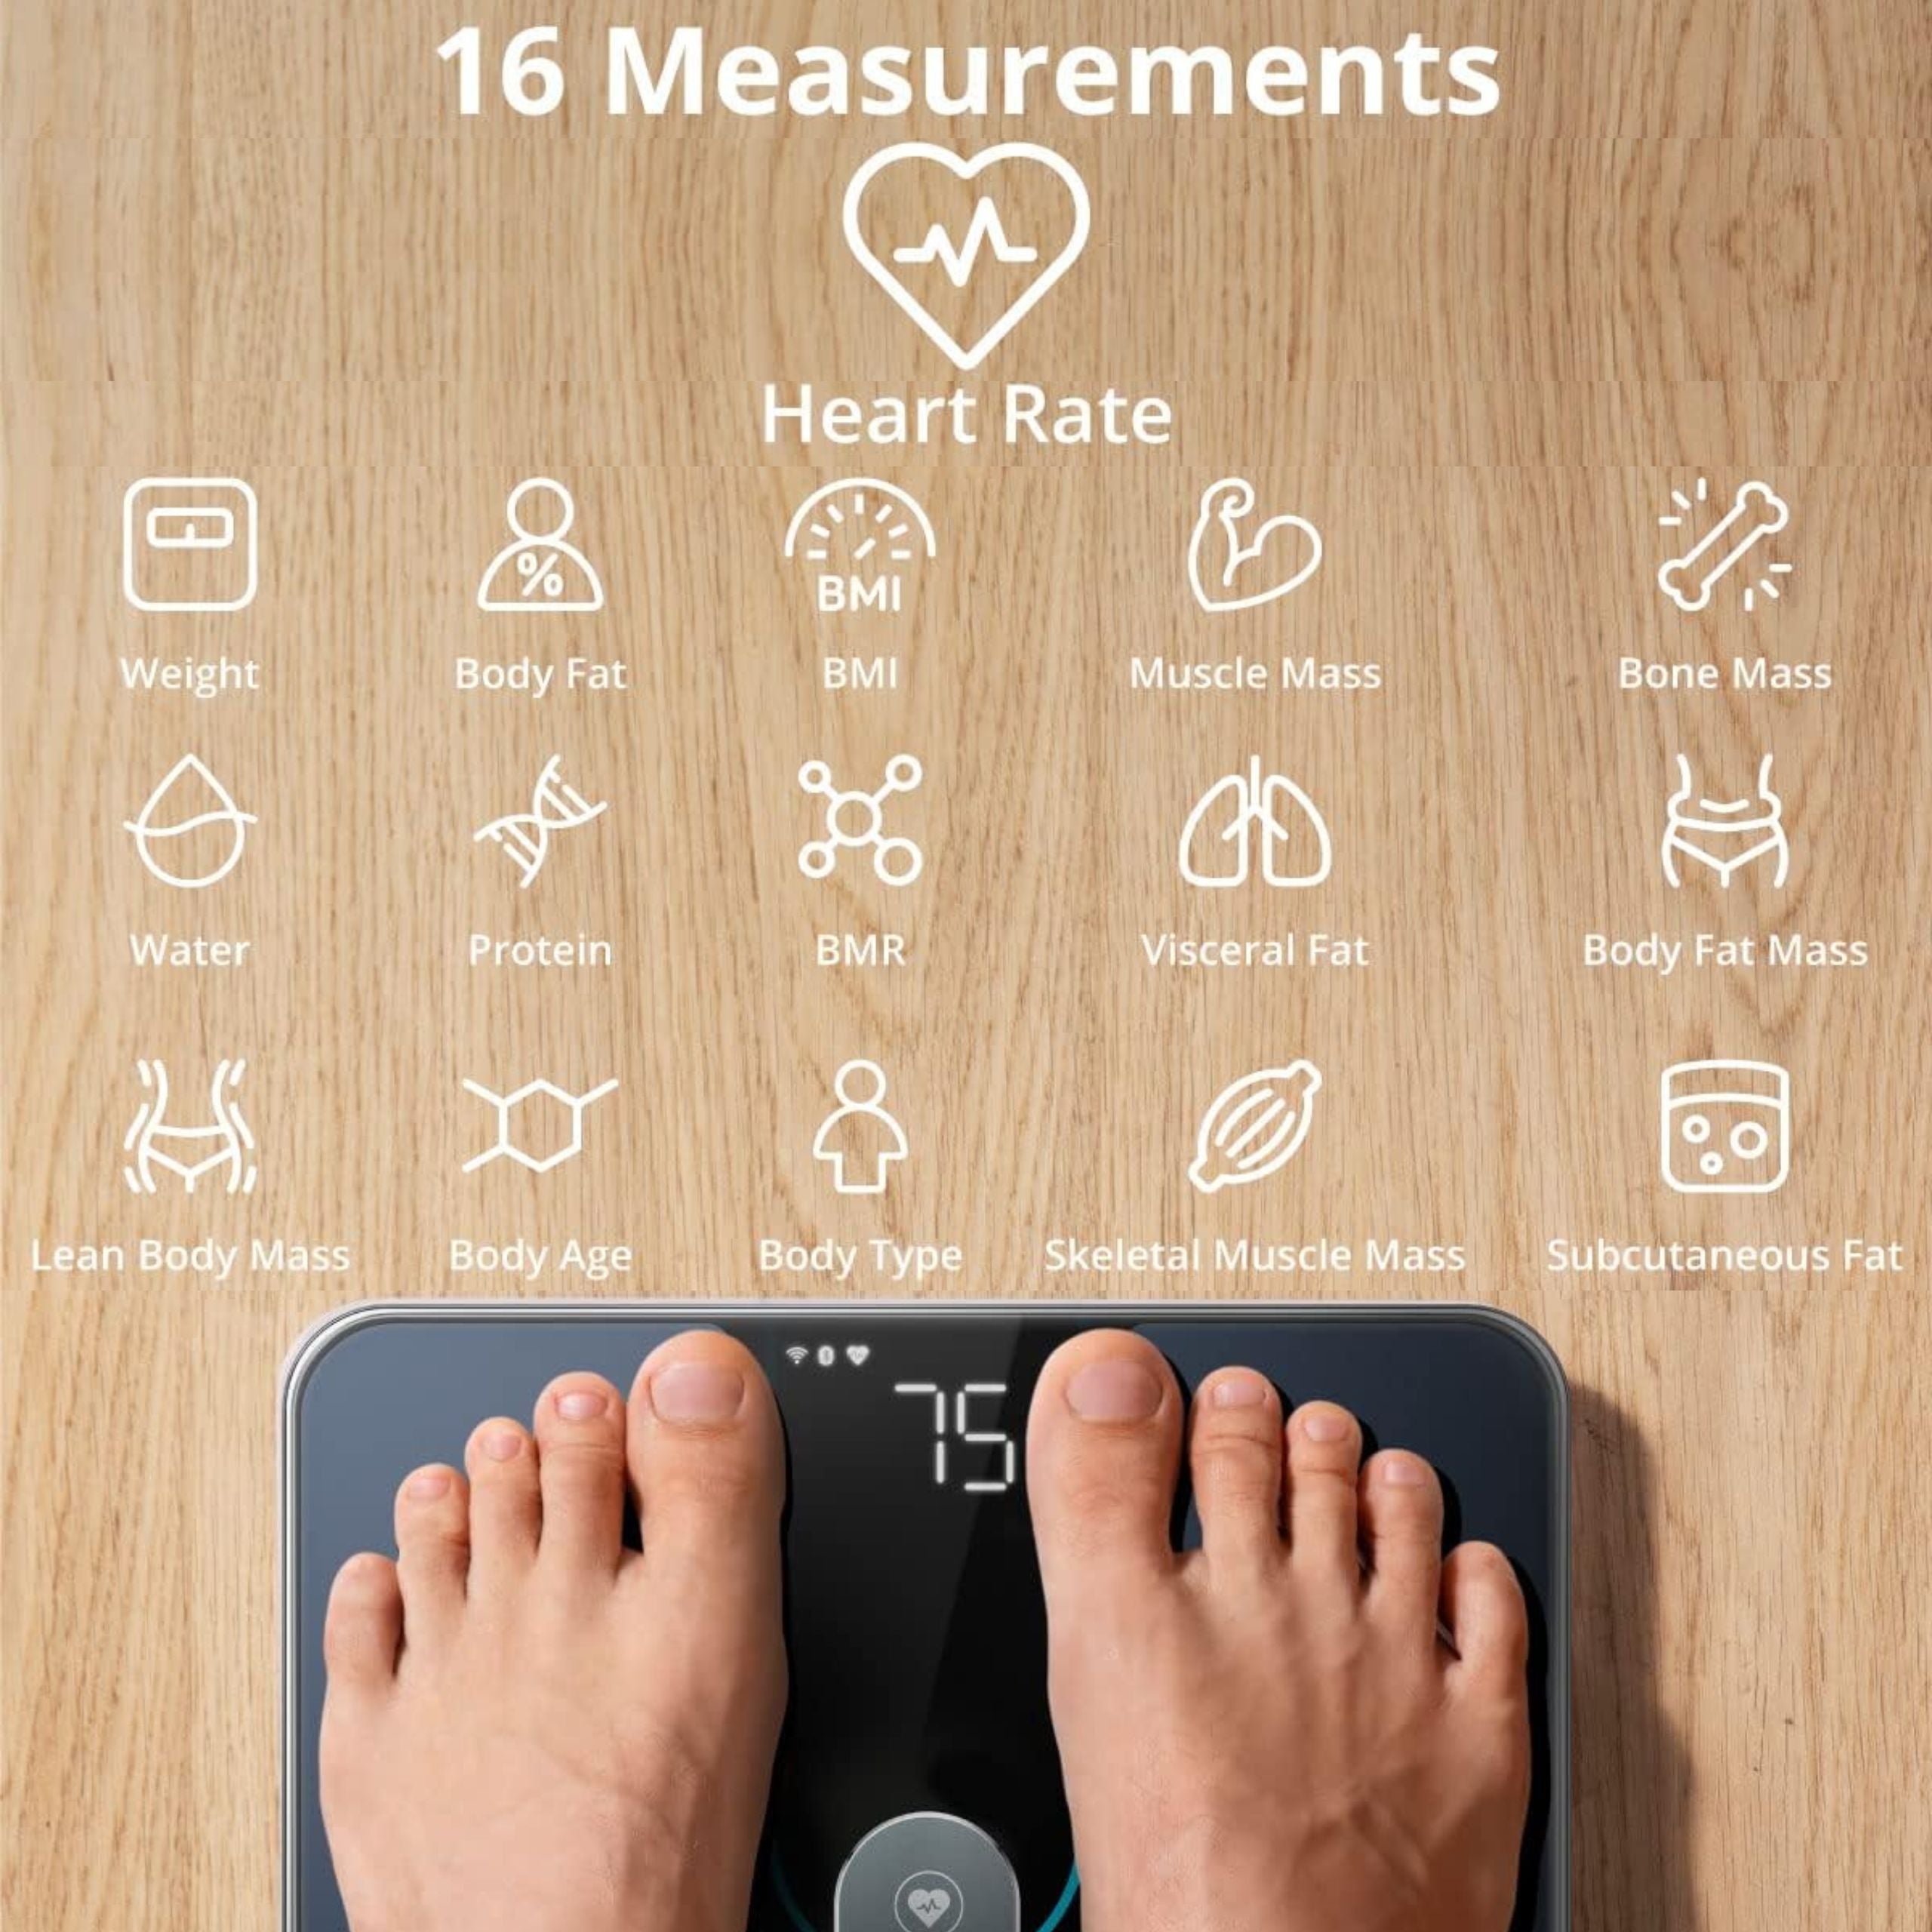 Anker - Eufy Smart Scale P2 With Fitness T9148K11